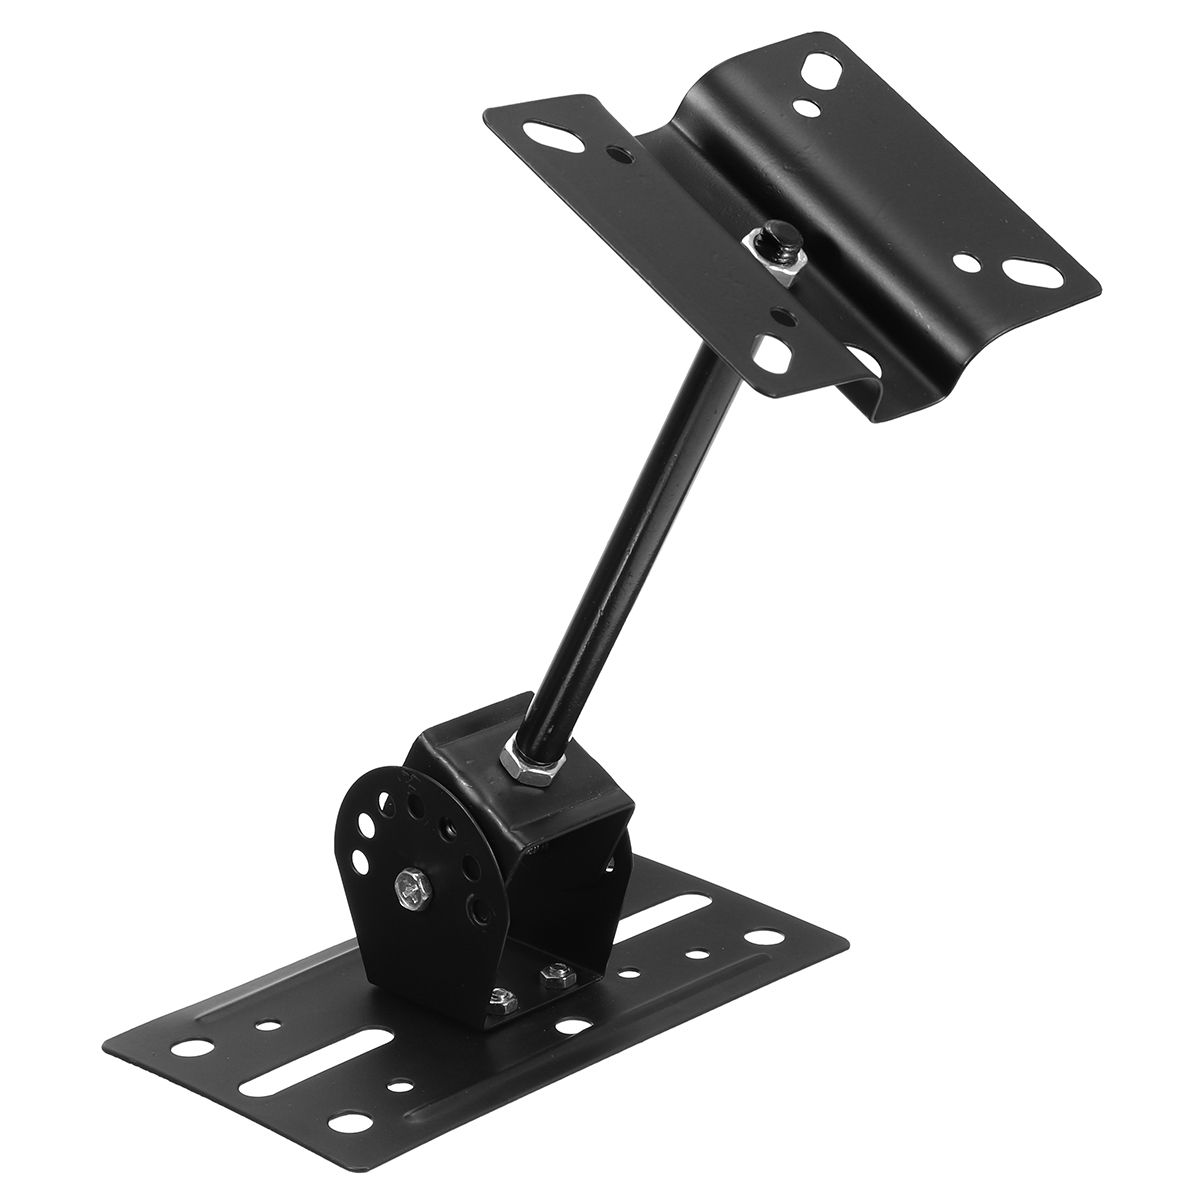 Universal-180-Degree-Rotation-Wall-Hanging-Bracket-Stand-Holder-Stabilizer-for-Speaker-Home-Theatre--1633796